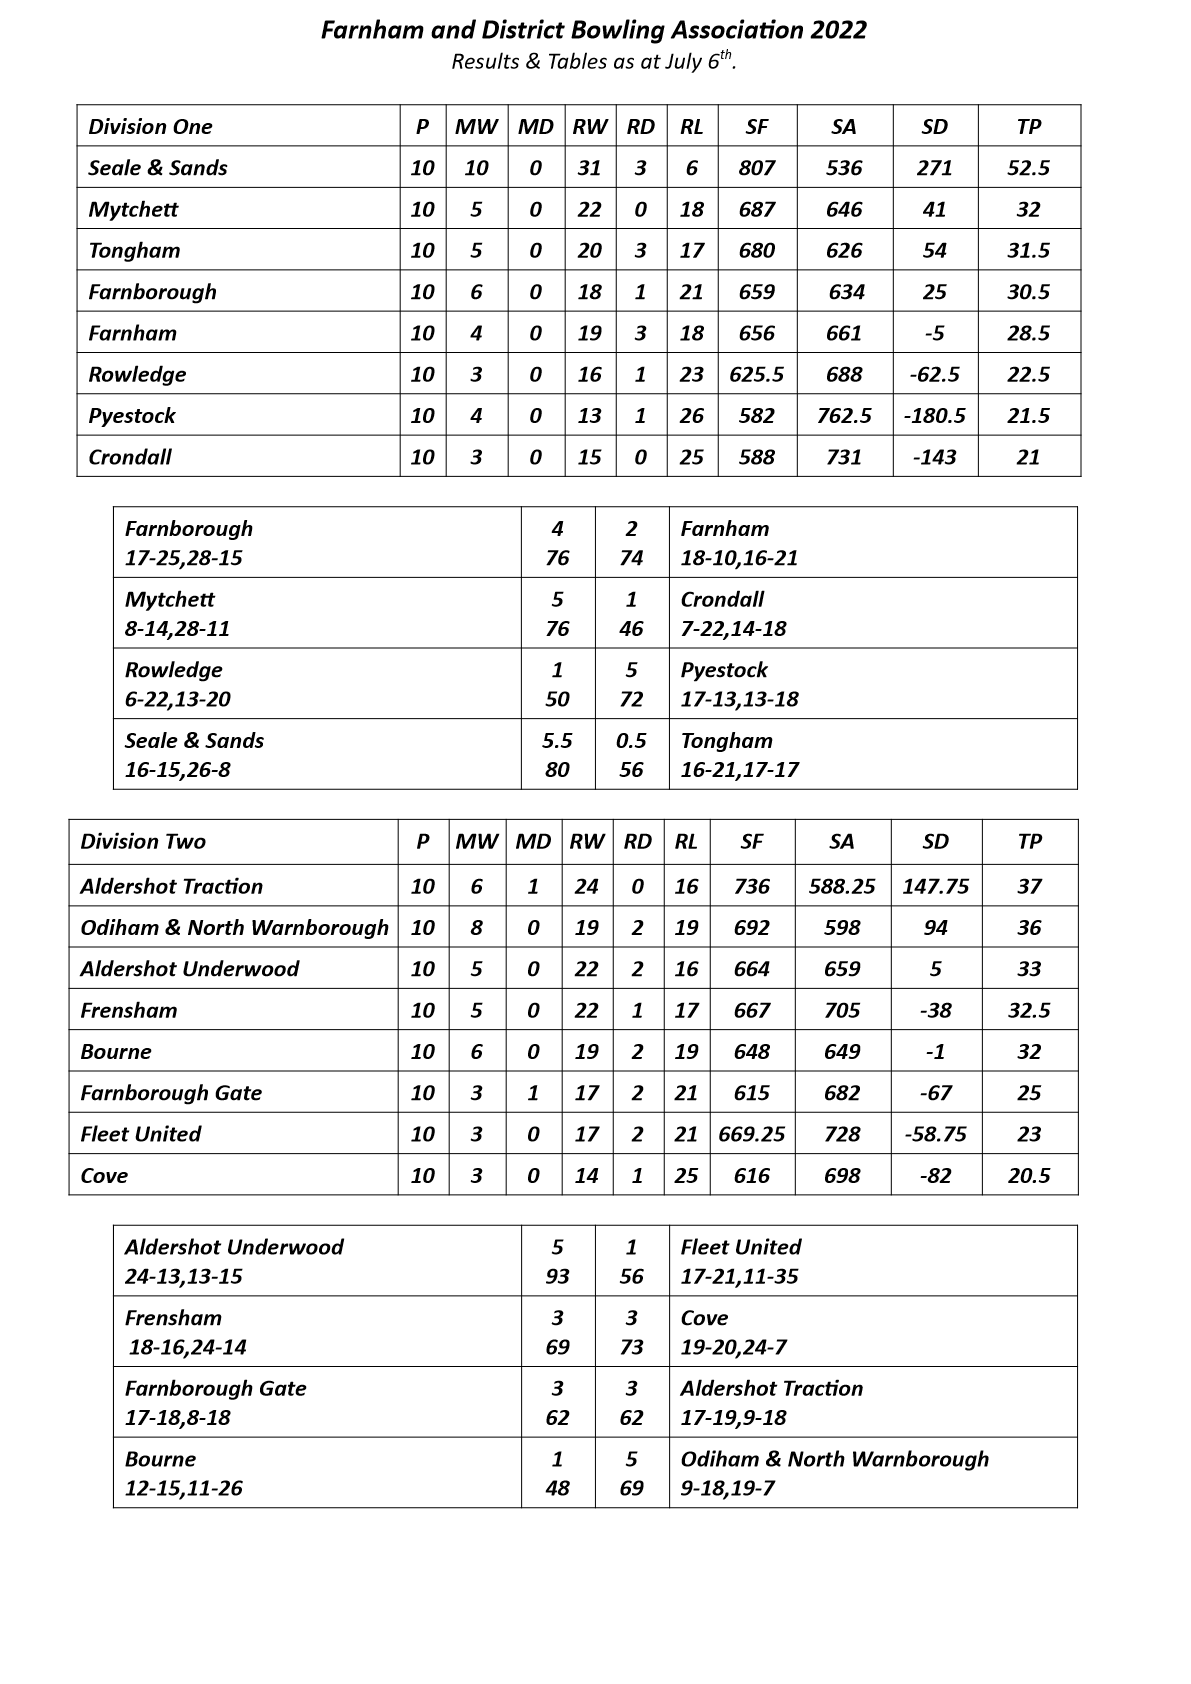  Farnham&District Bowling Association  Tables & Results as at July 6th